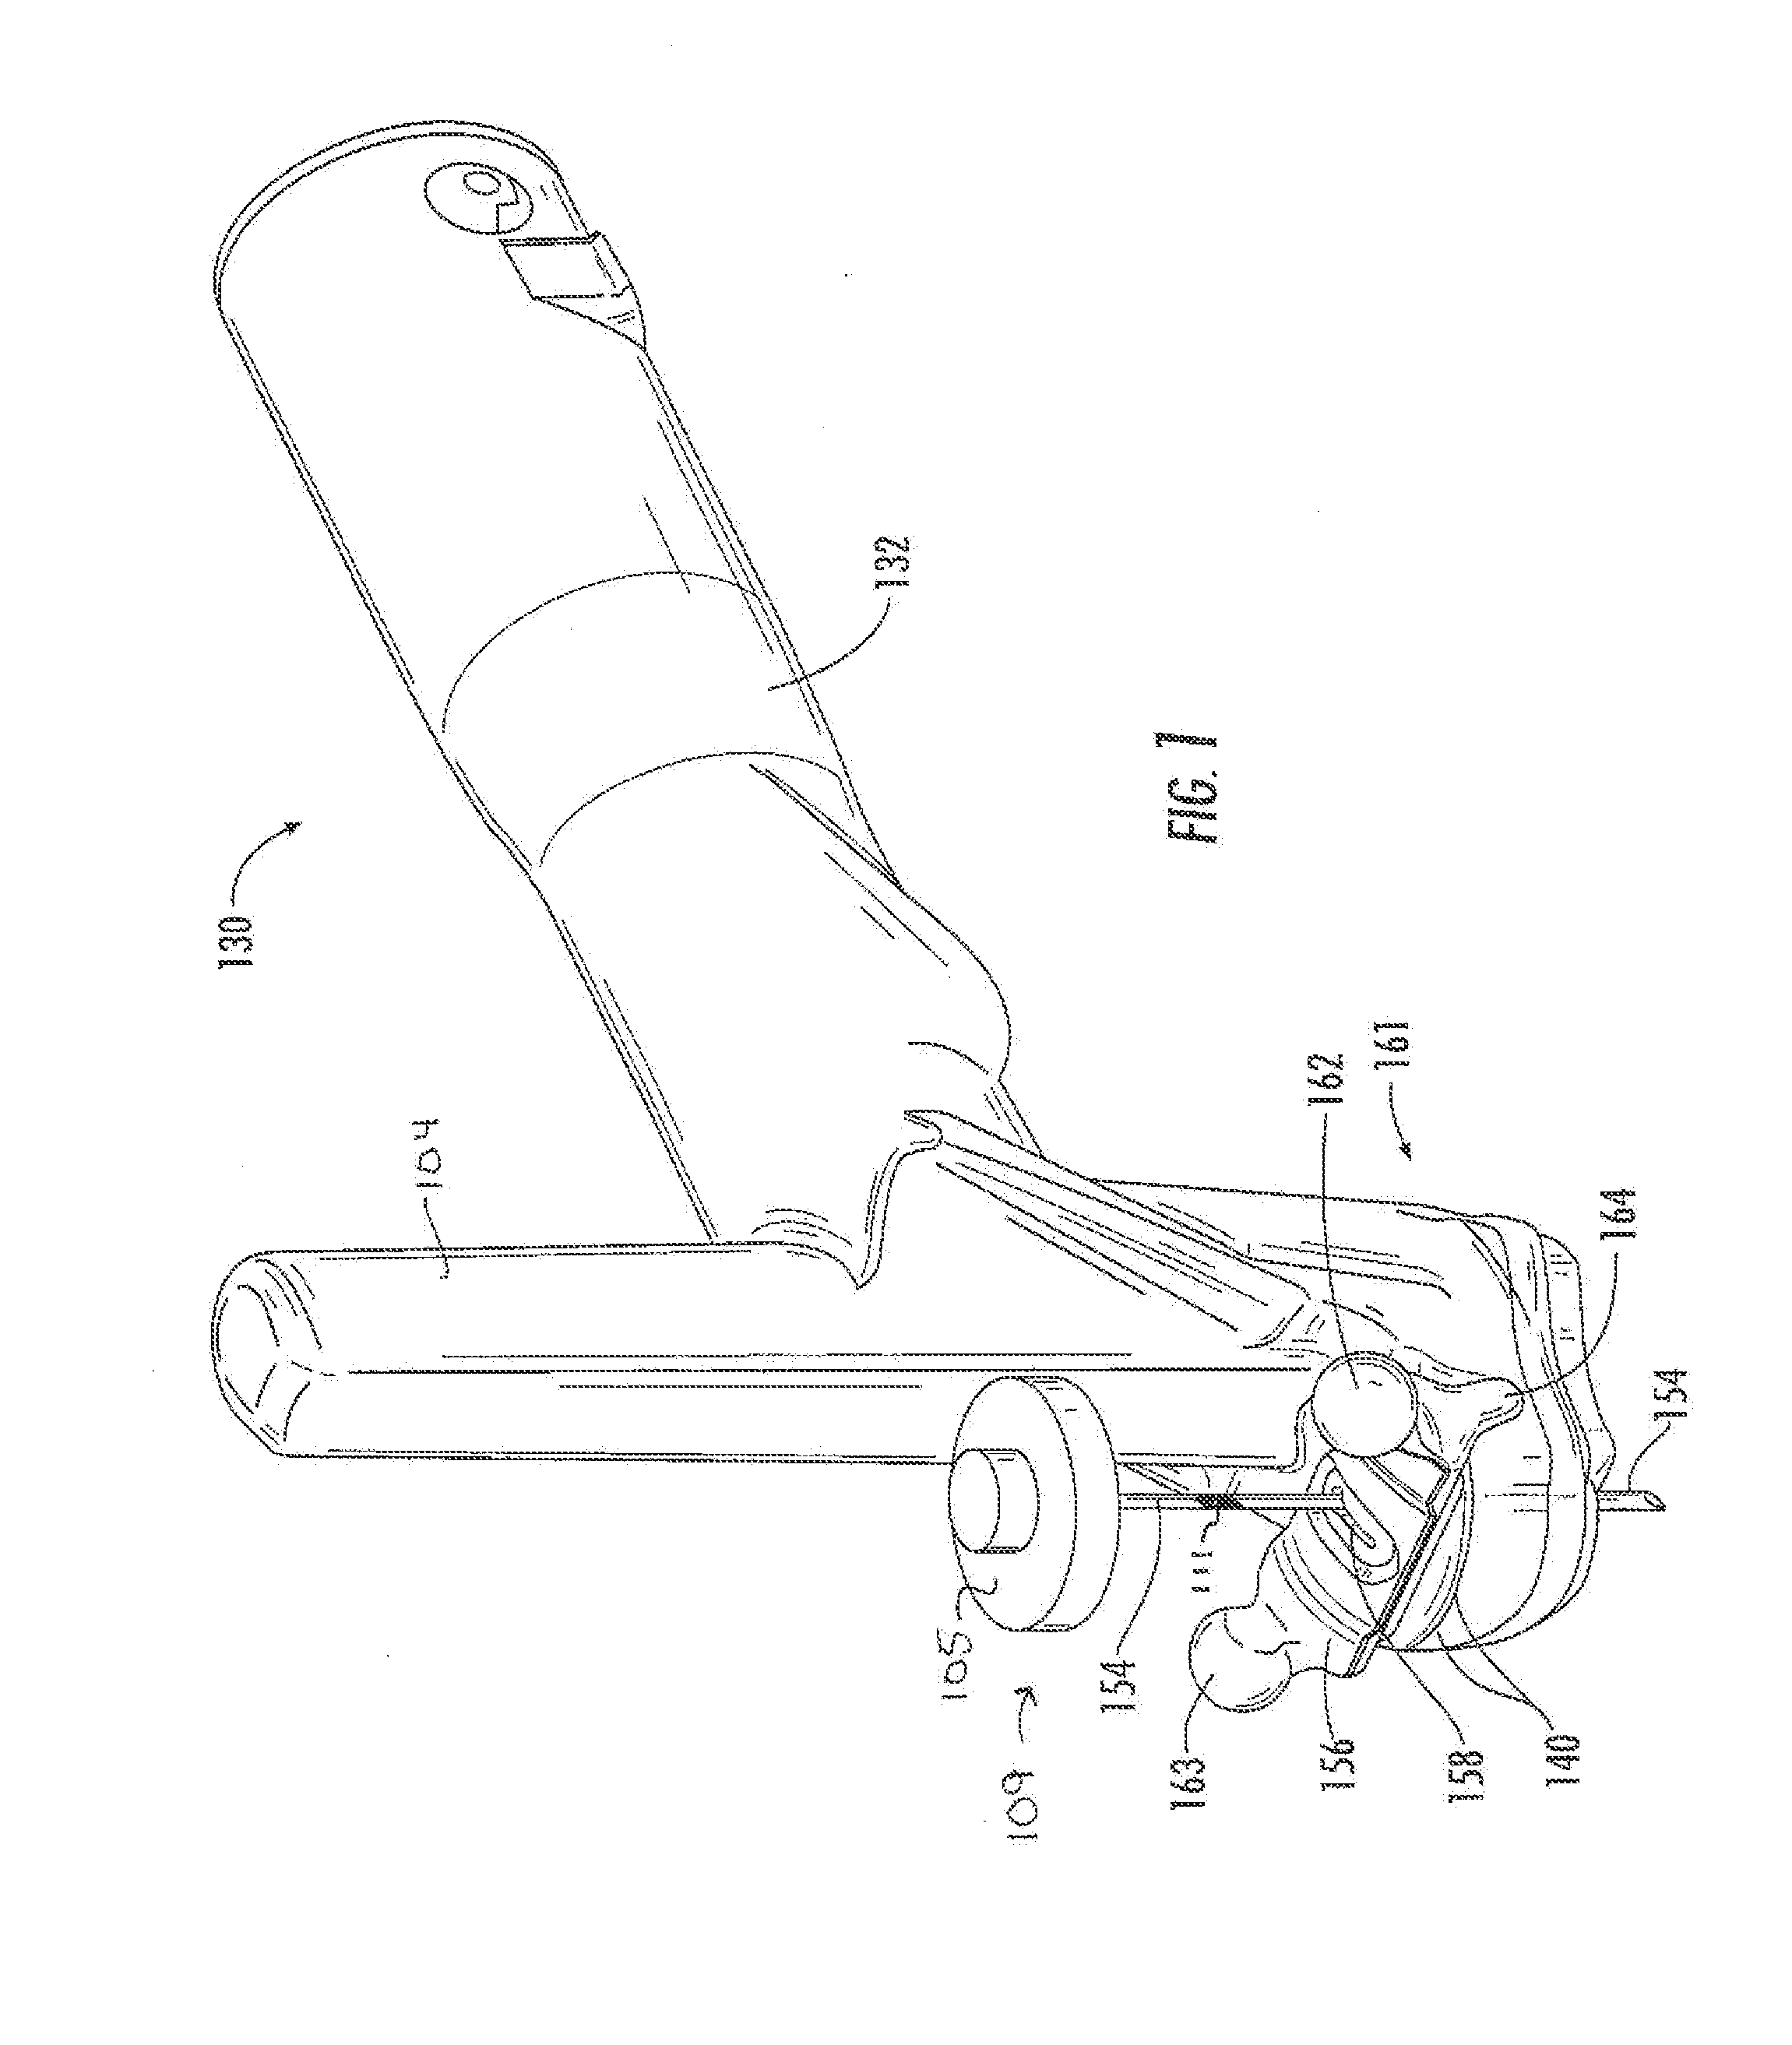 Ultrasound Guidance System Including Tagged Probe Assembly